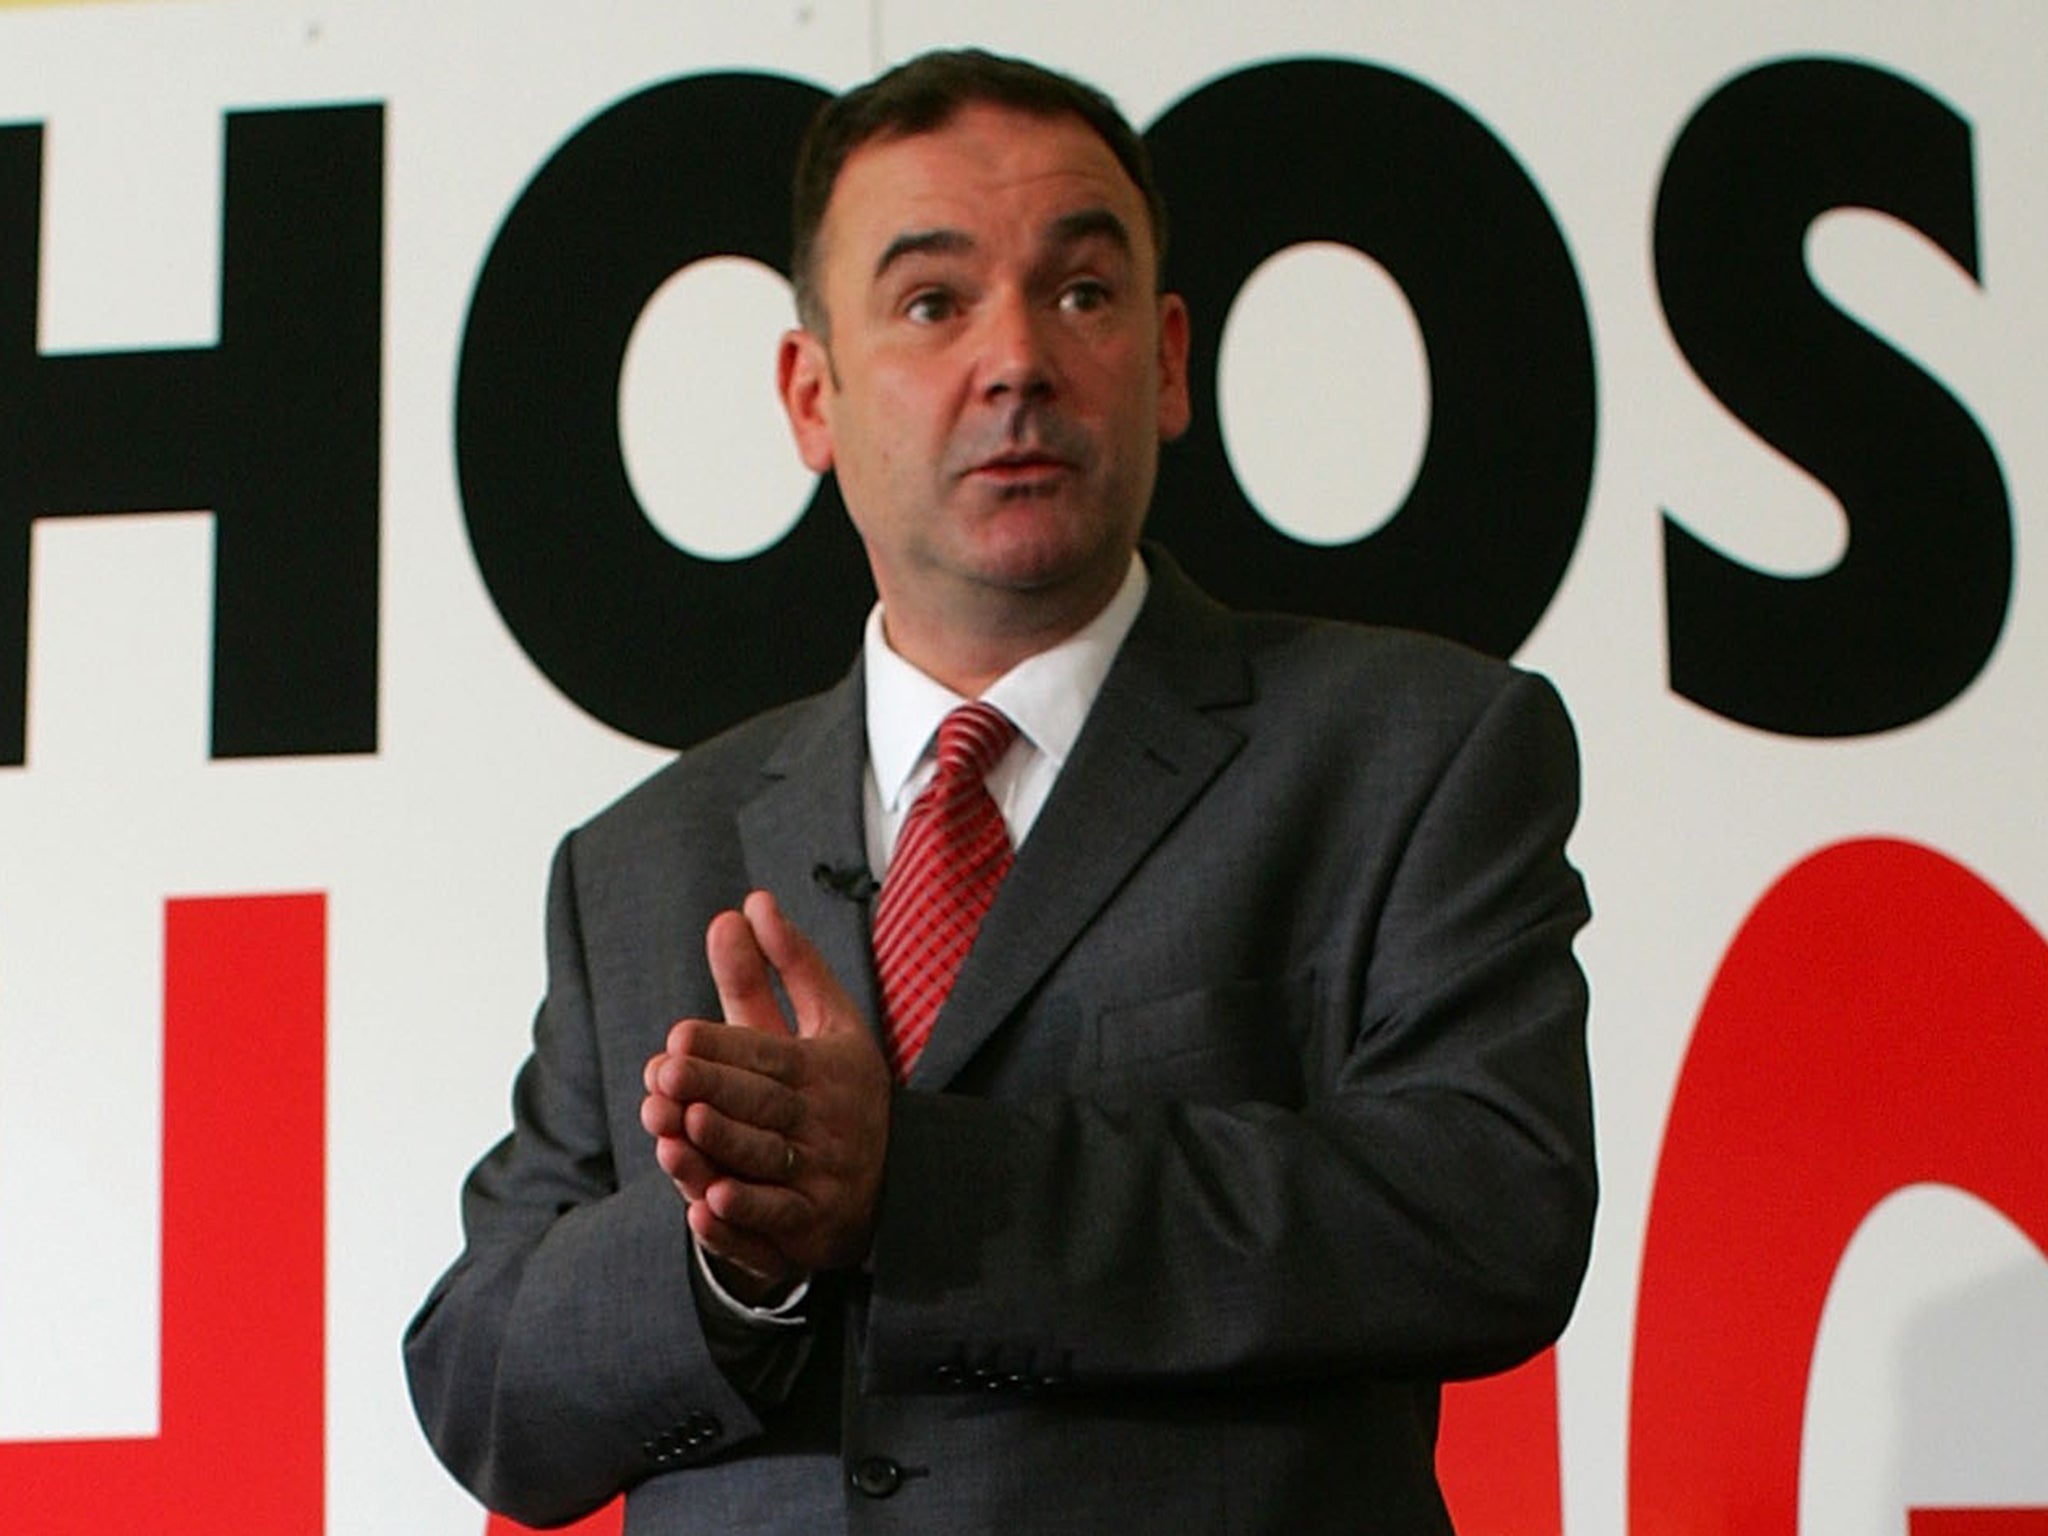 Shadow Cabinet member Jon Cruddas said Labour’s plans would empower supporters